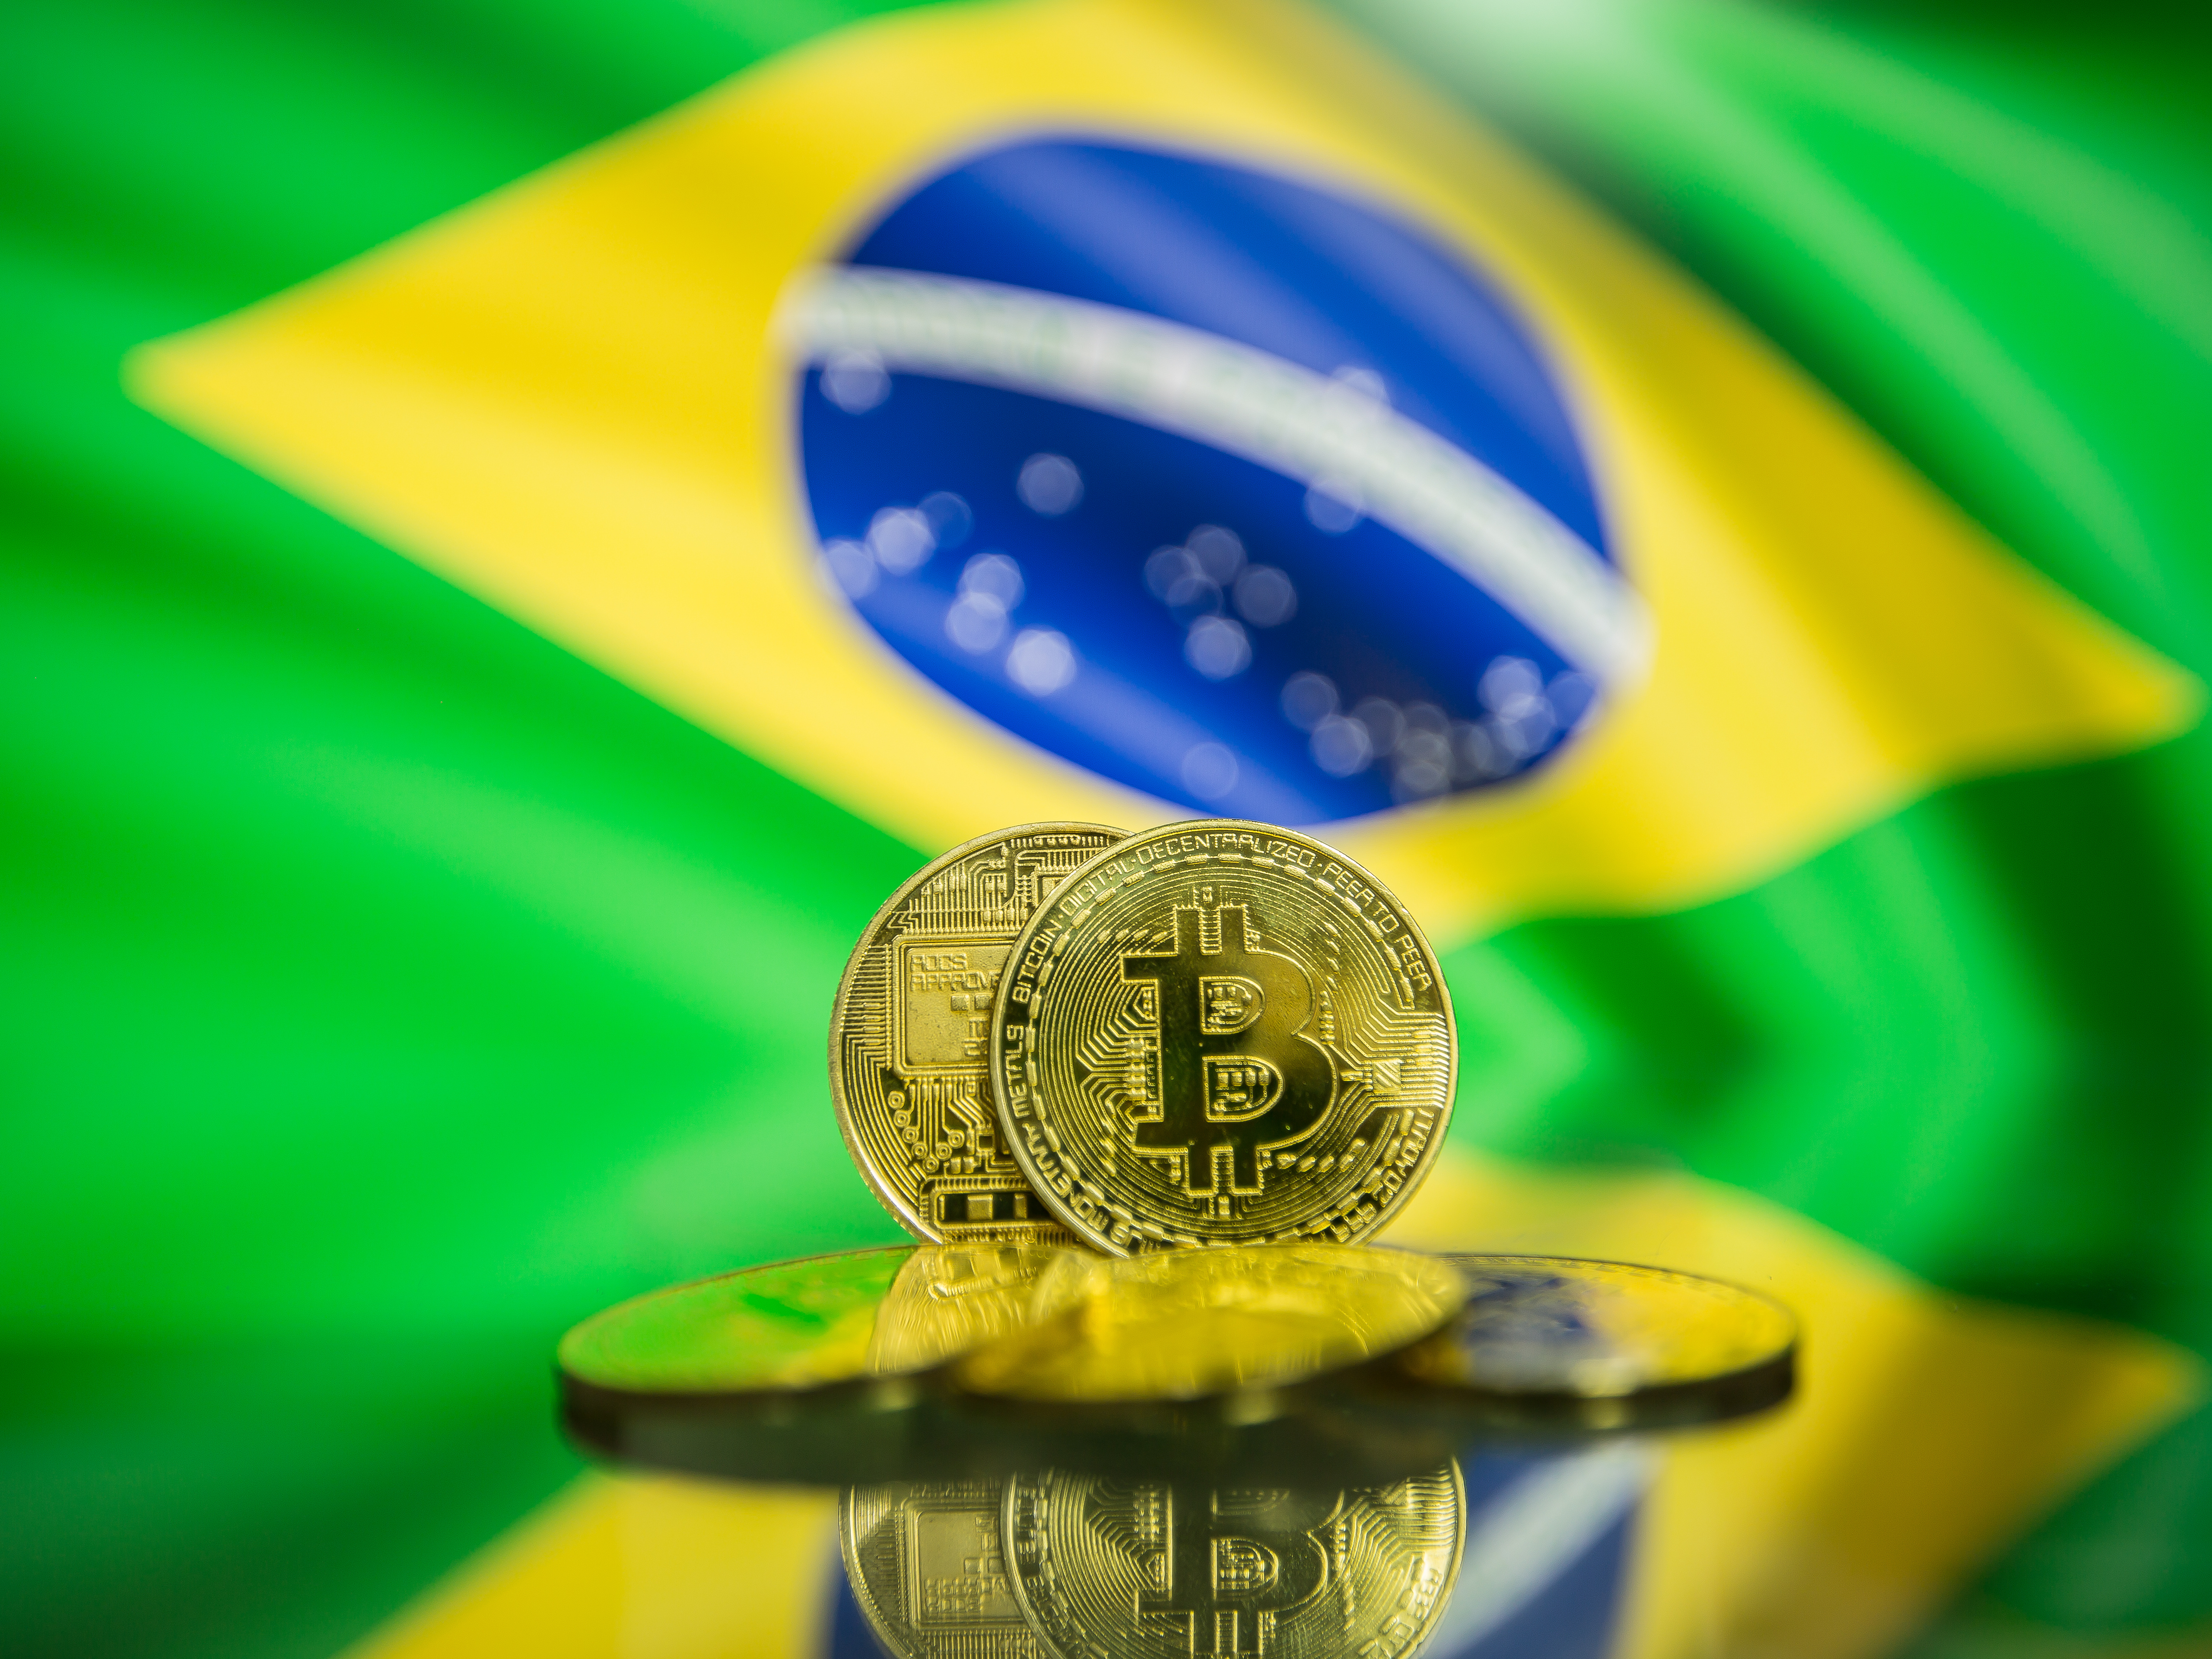 Rio de Janeiro will allow its citizens to pay their property taxes in cryptocurrencies from 2023